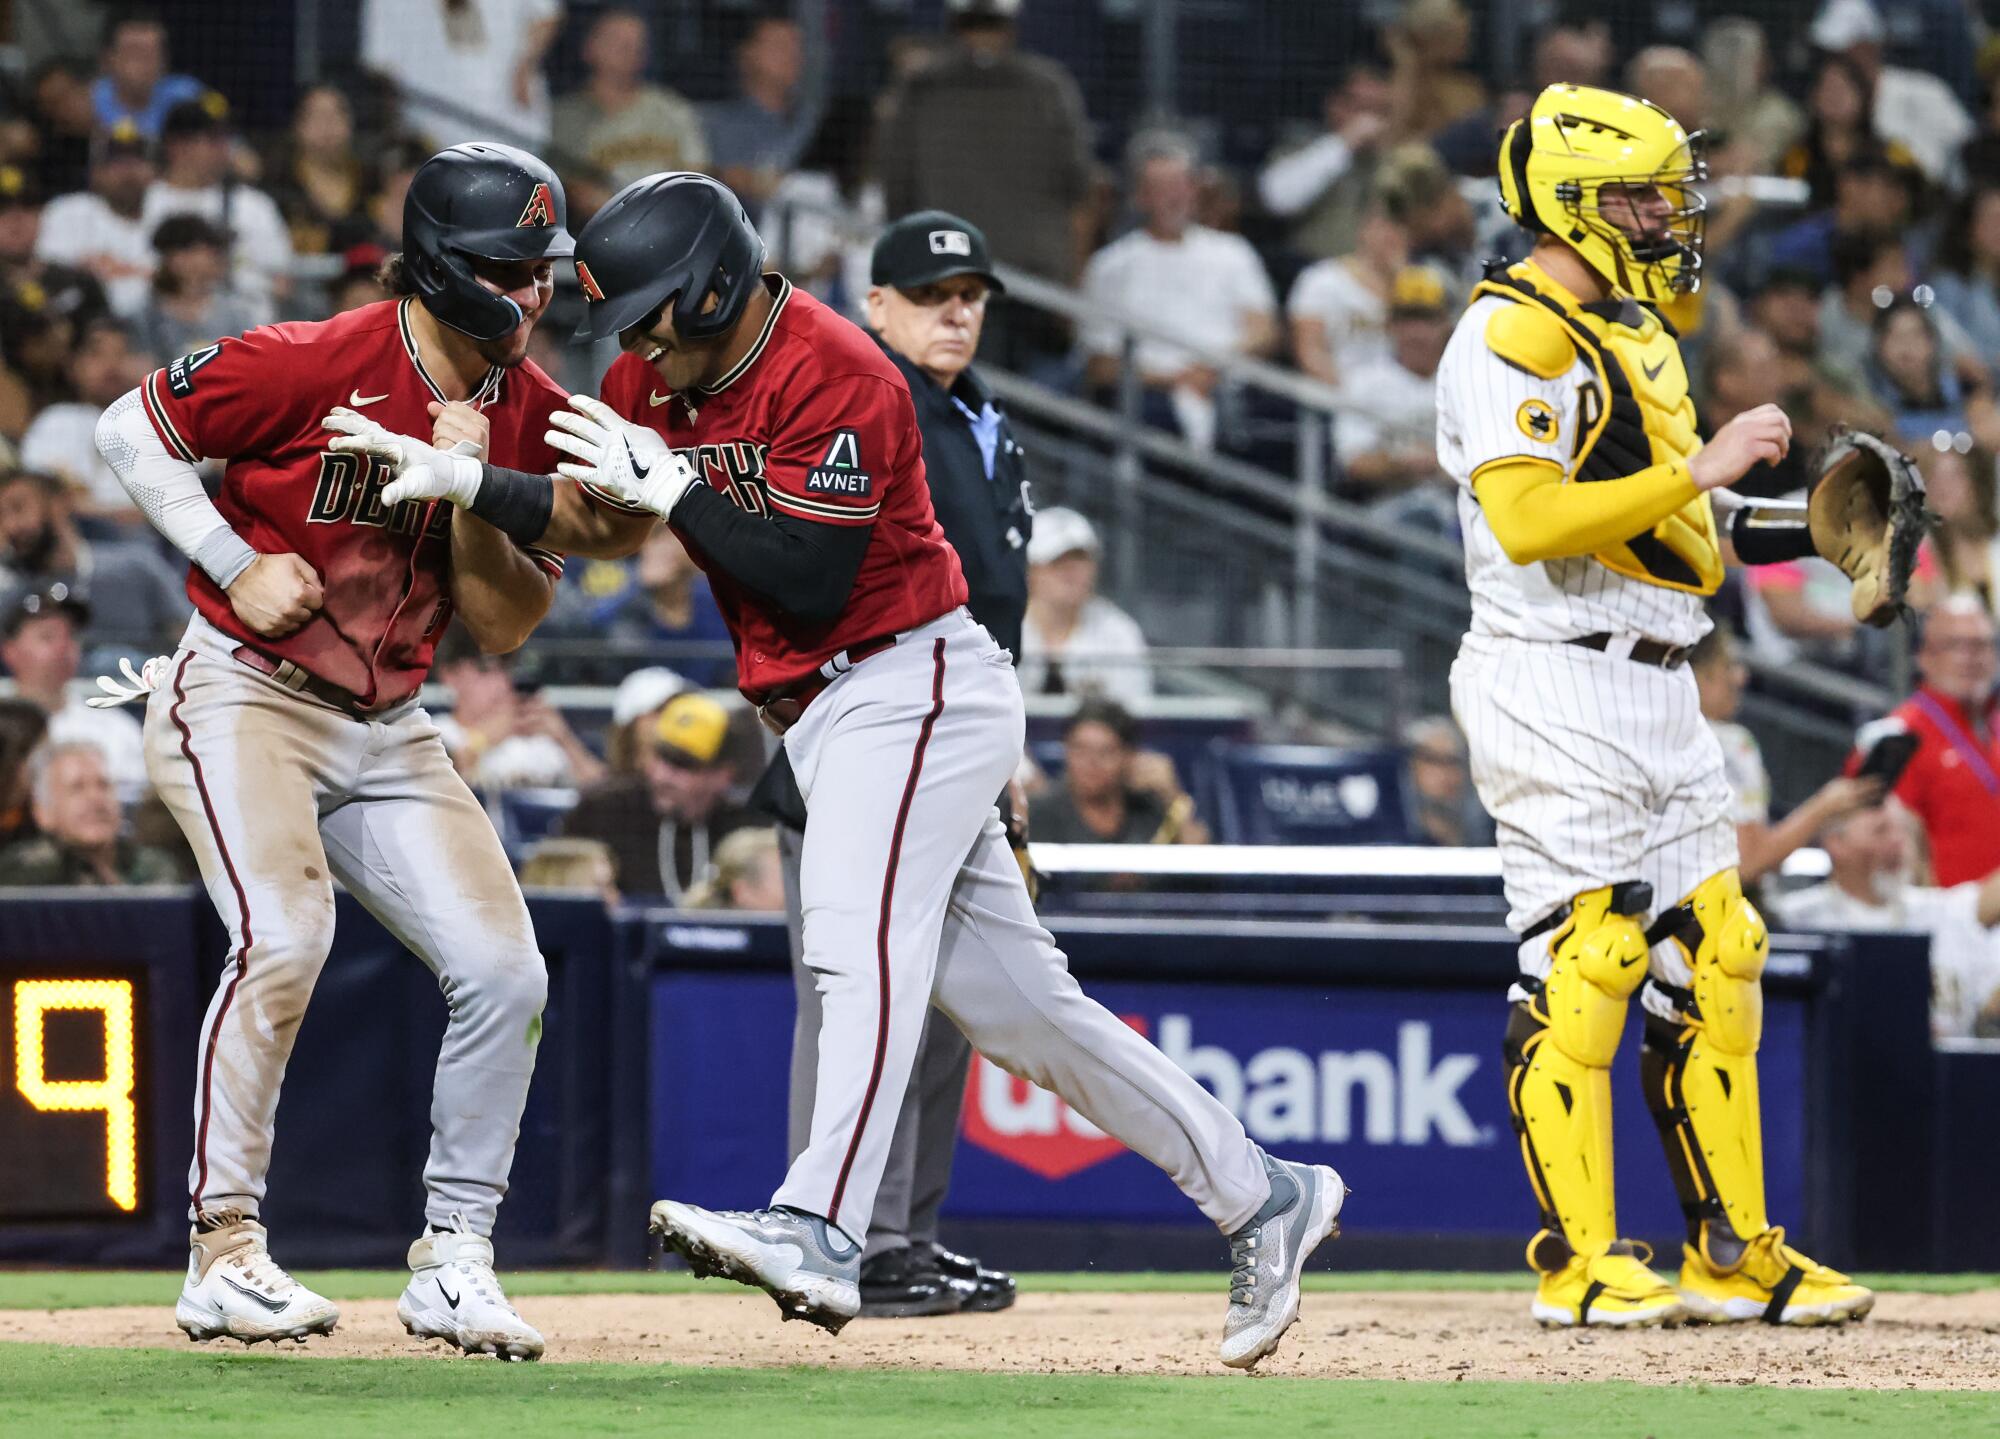 Brown's Corner – PCL Padres, baseball at its best